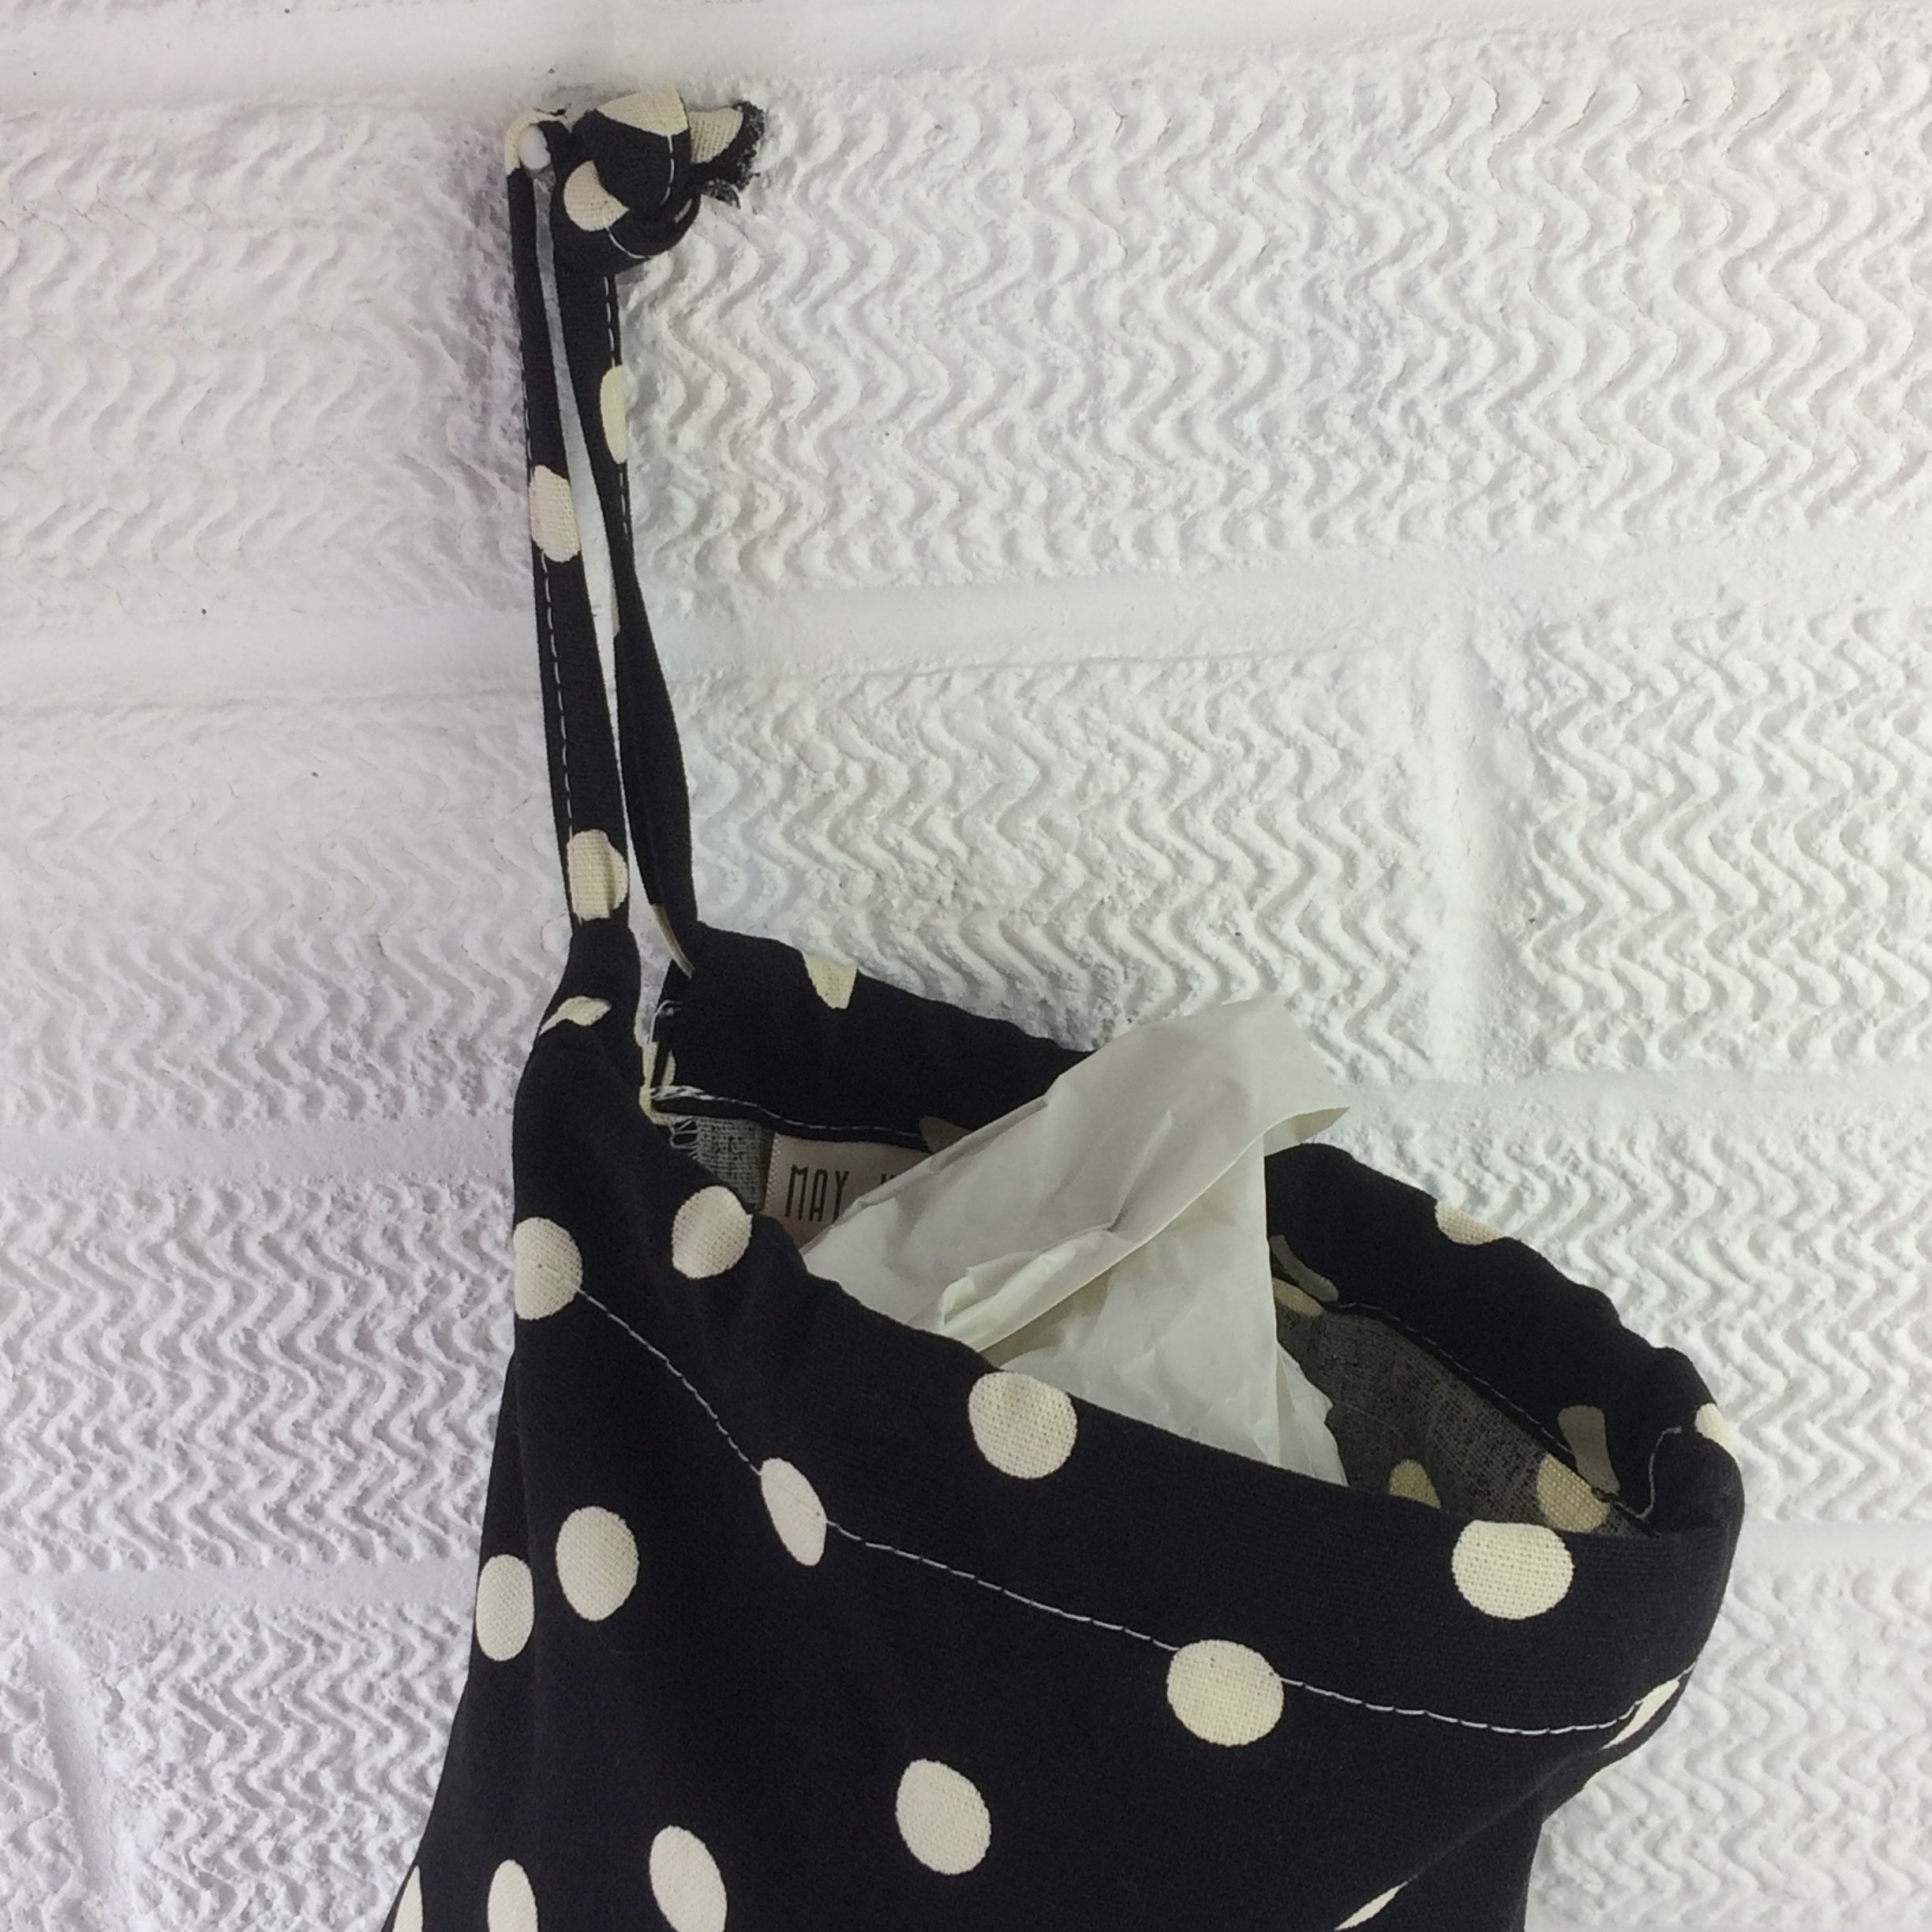 Plastic bag storage dispenser with large spots on a black background with drawstring top